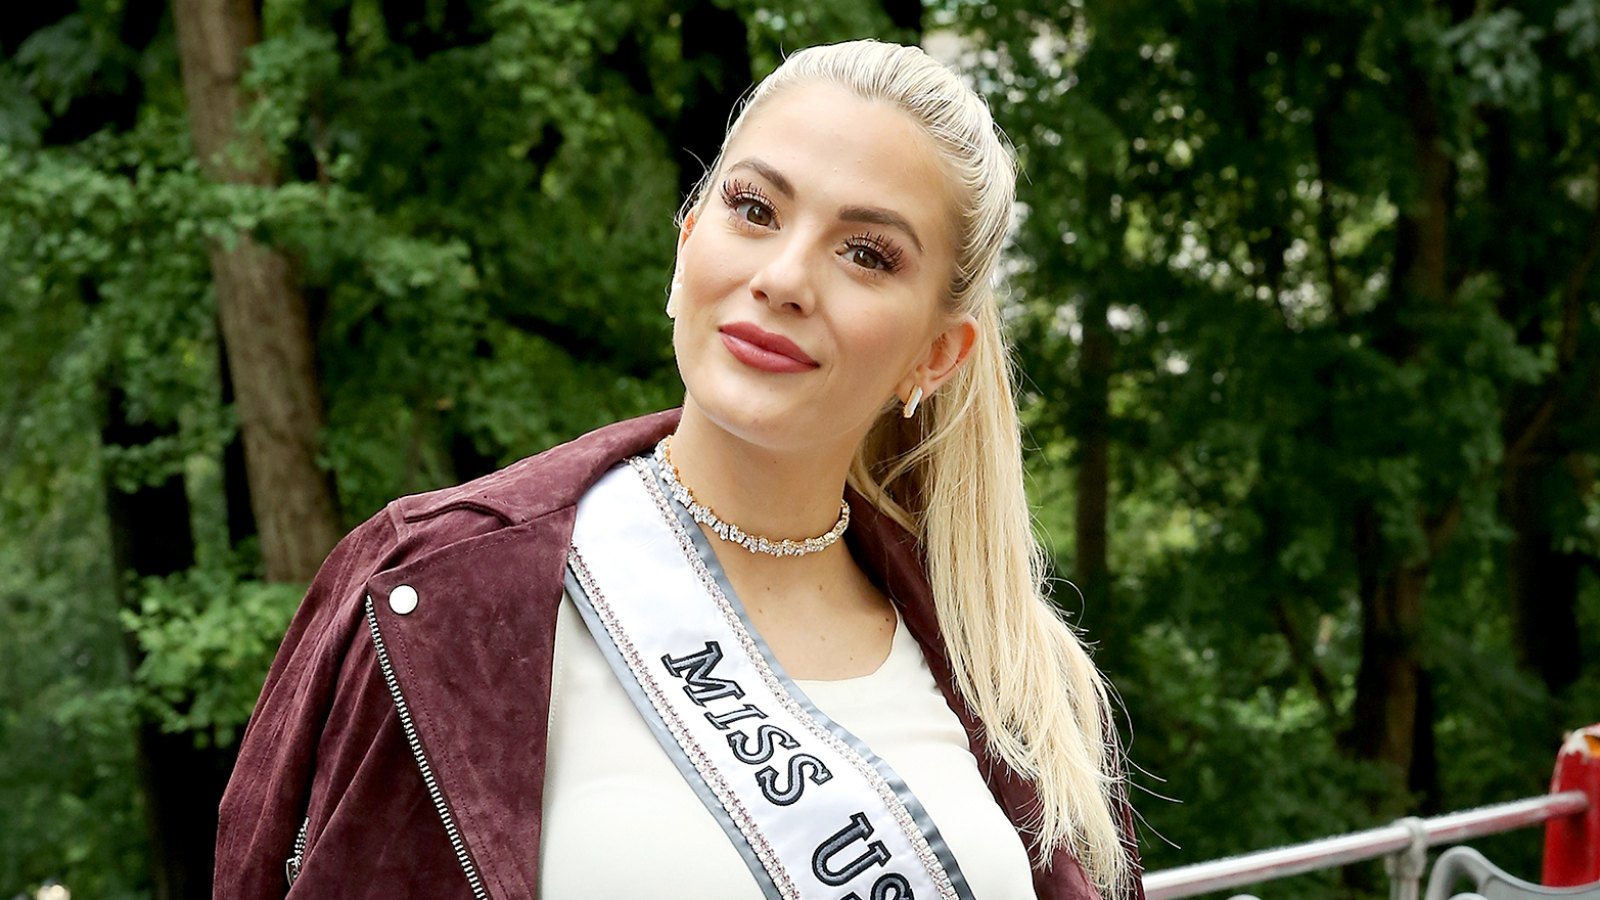 Miss-USA-Sarah-Rose-Summers-Slammed-for-Mocking-Non-English-Speaking-Contestants